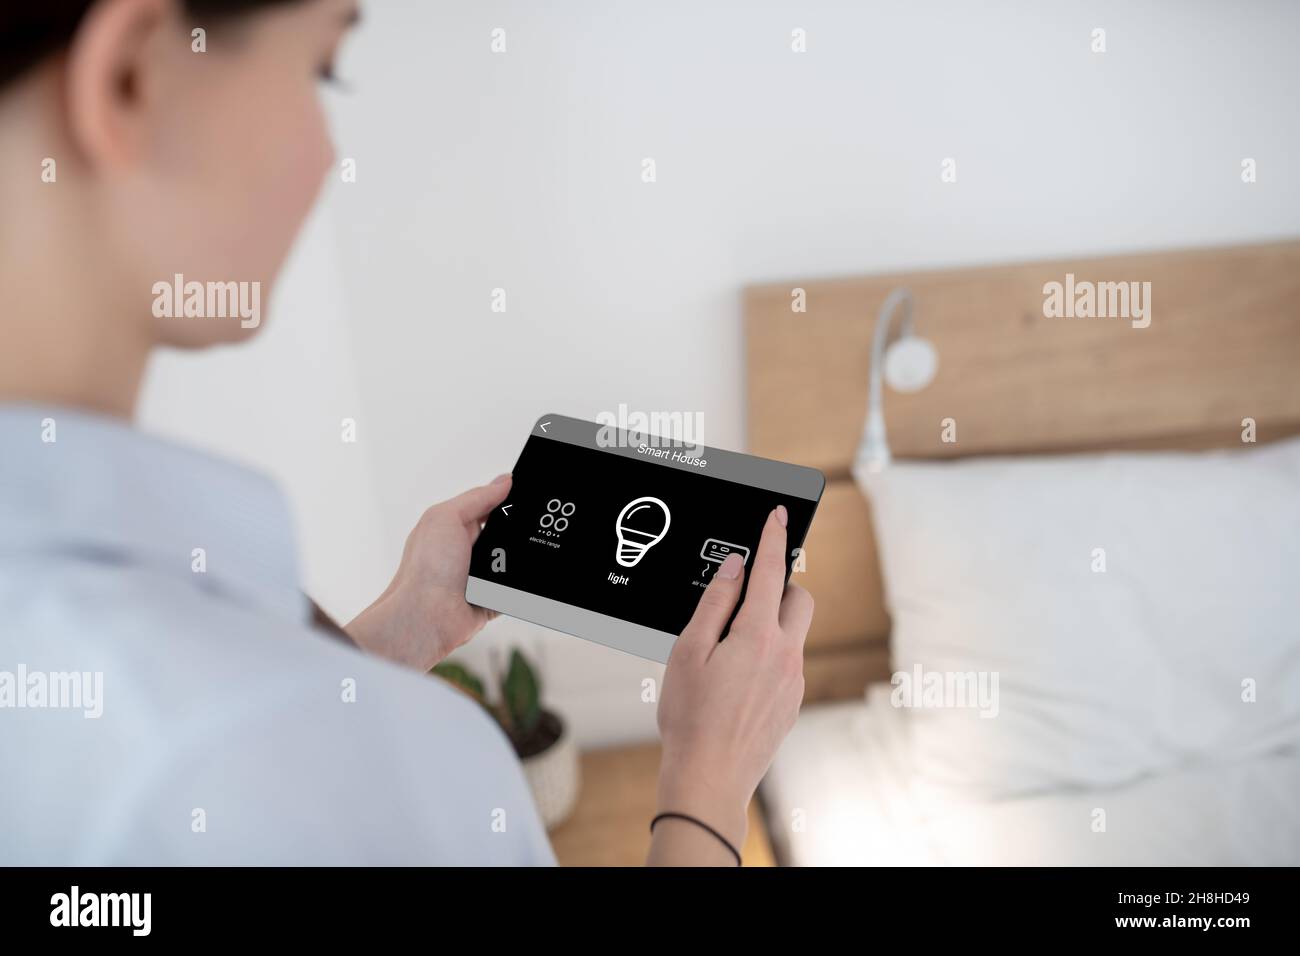 Female turning on light using a remote control Stock Photo